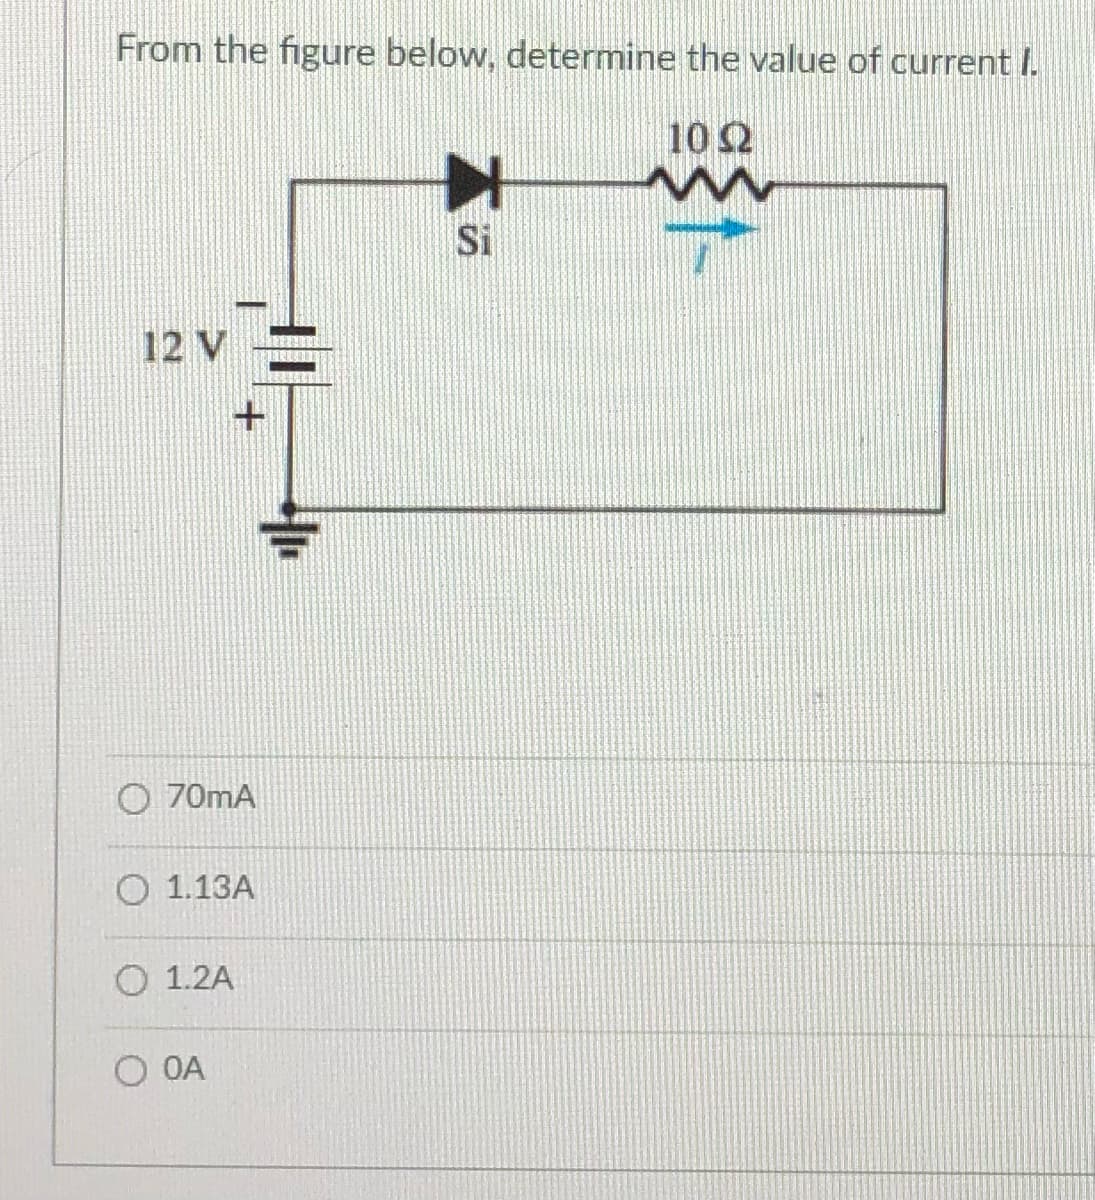 From the figure below, determine the value of current I.
10 Ω
Si
12 V
O 70mA
О 1.13А
О 1.2A
O OA
